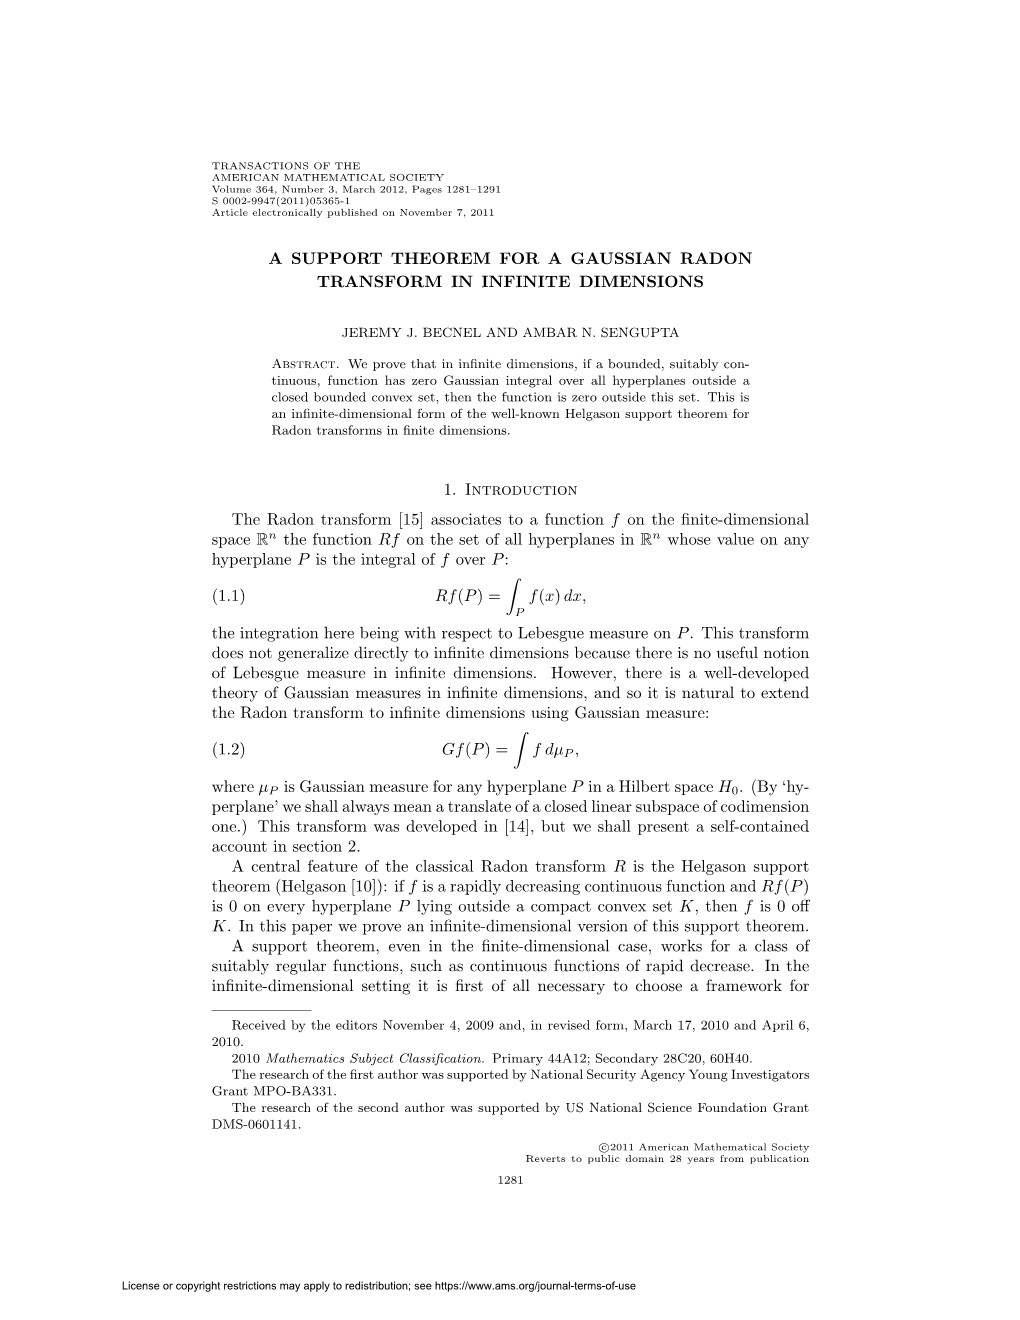 A Support Theorem for a Gaussian Radon Transform in Infinite Dimensions